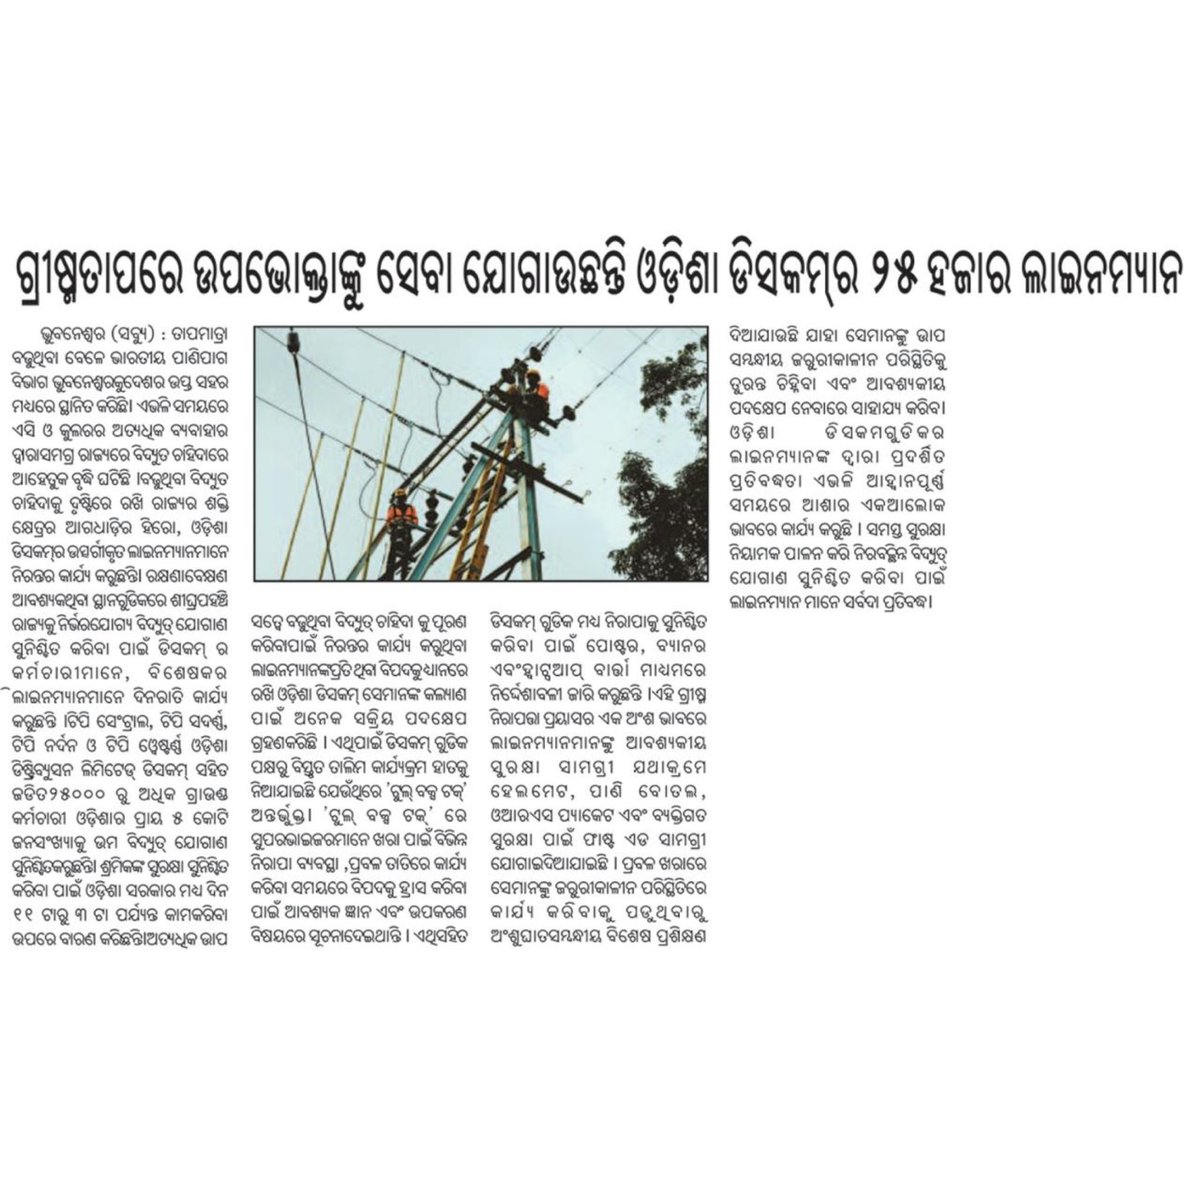 Our Power Victors, consisting over 25,000 linemen across TPCODL, TPNODL, TPSODL, and TPWODL discoms, stand as pillars of strength, ensuring uninterrupted power supply to nearly 5 crore residents in Odisha.

Recognizing the risks posed by extreme heat, Tata Power led Odisha